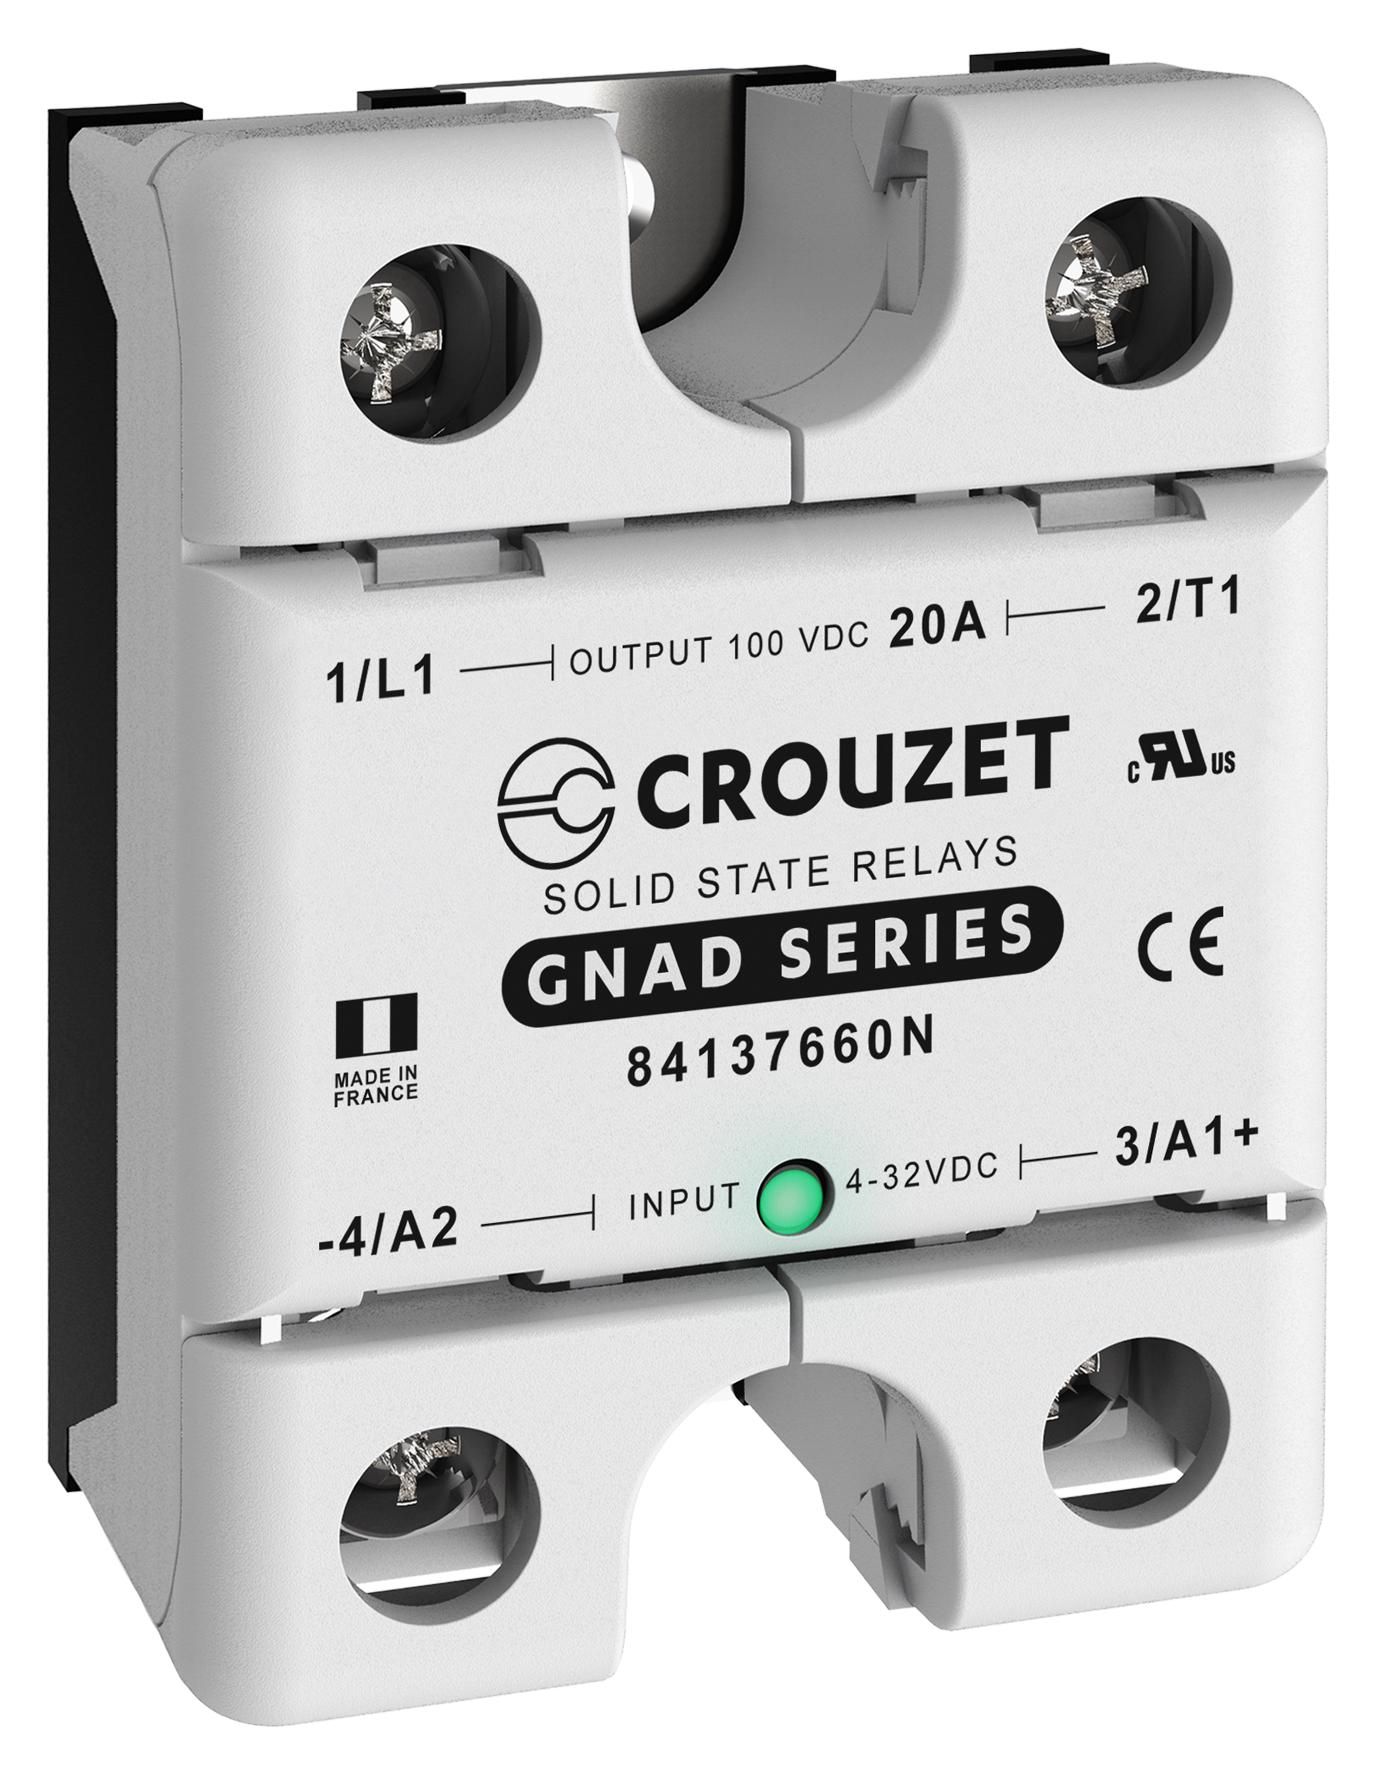 84137660N SOLID STATE RELAY, 20A, 5-100VDC, PANEL CROUZET